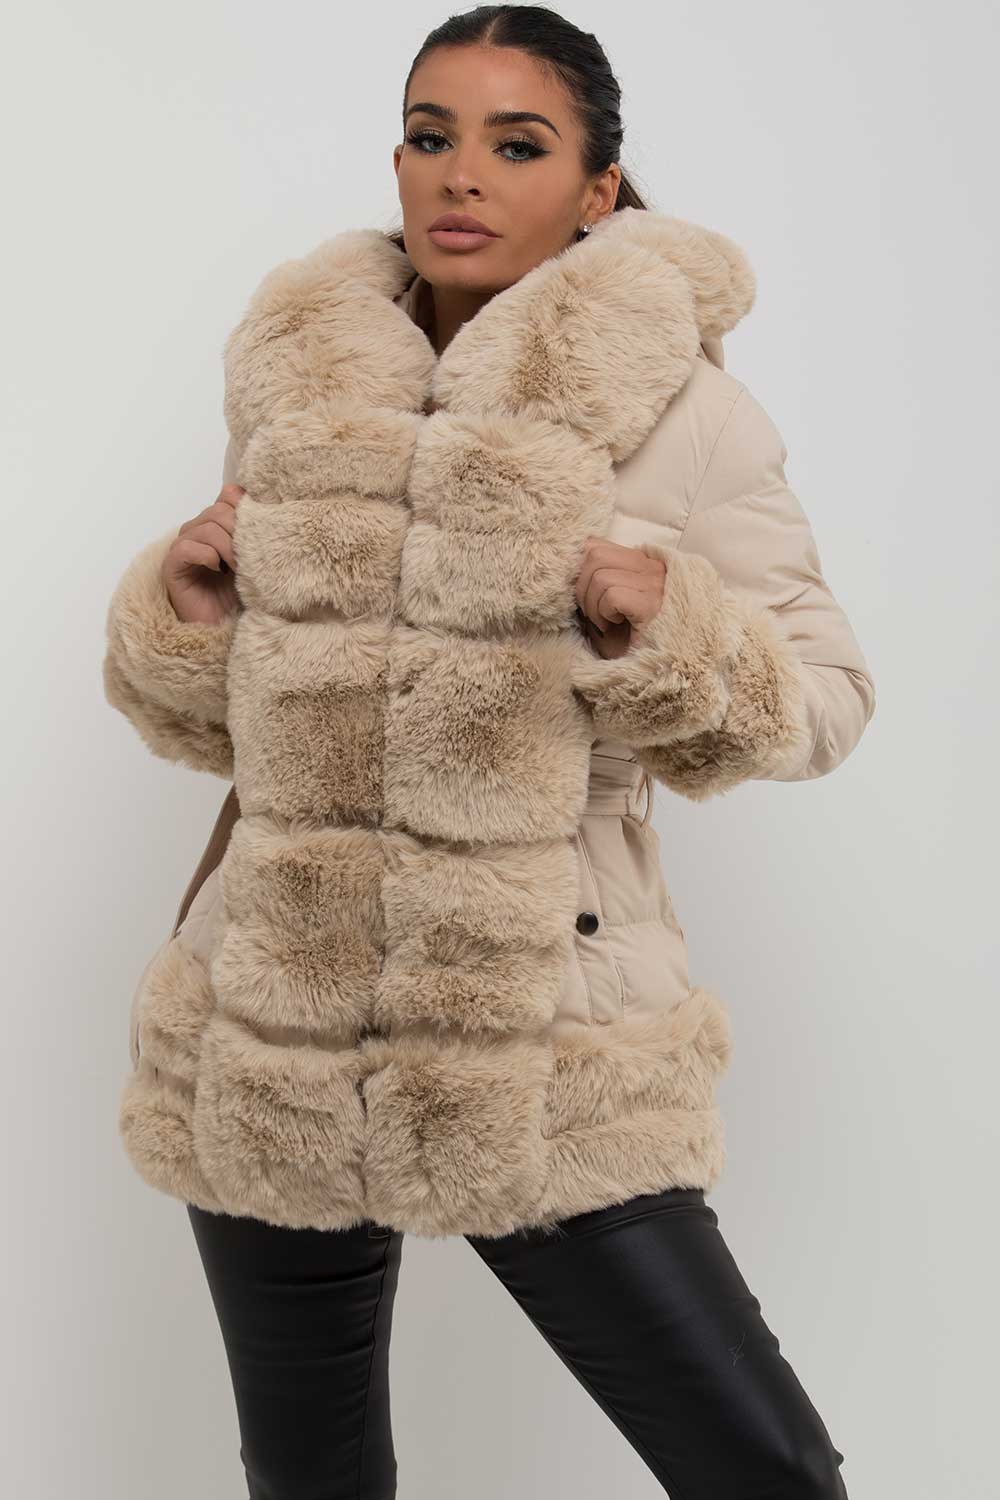 puffer jacket with fur hood cuff and trim uk womens